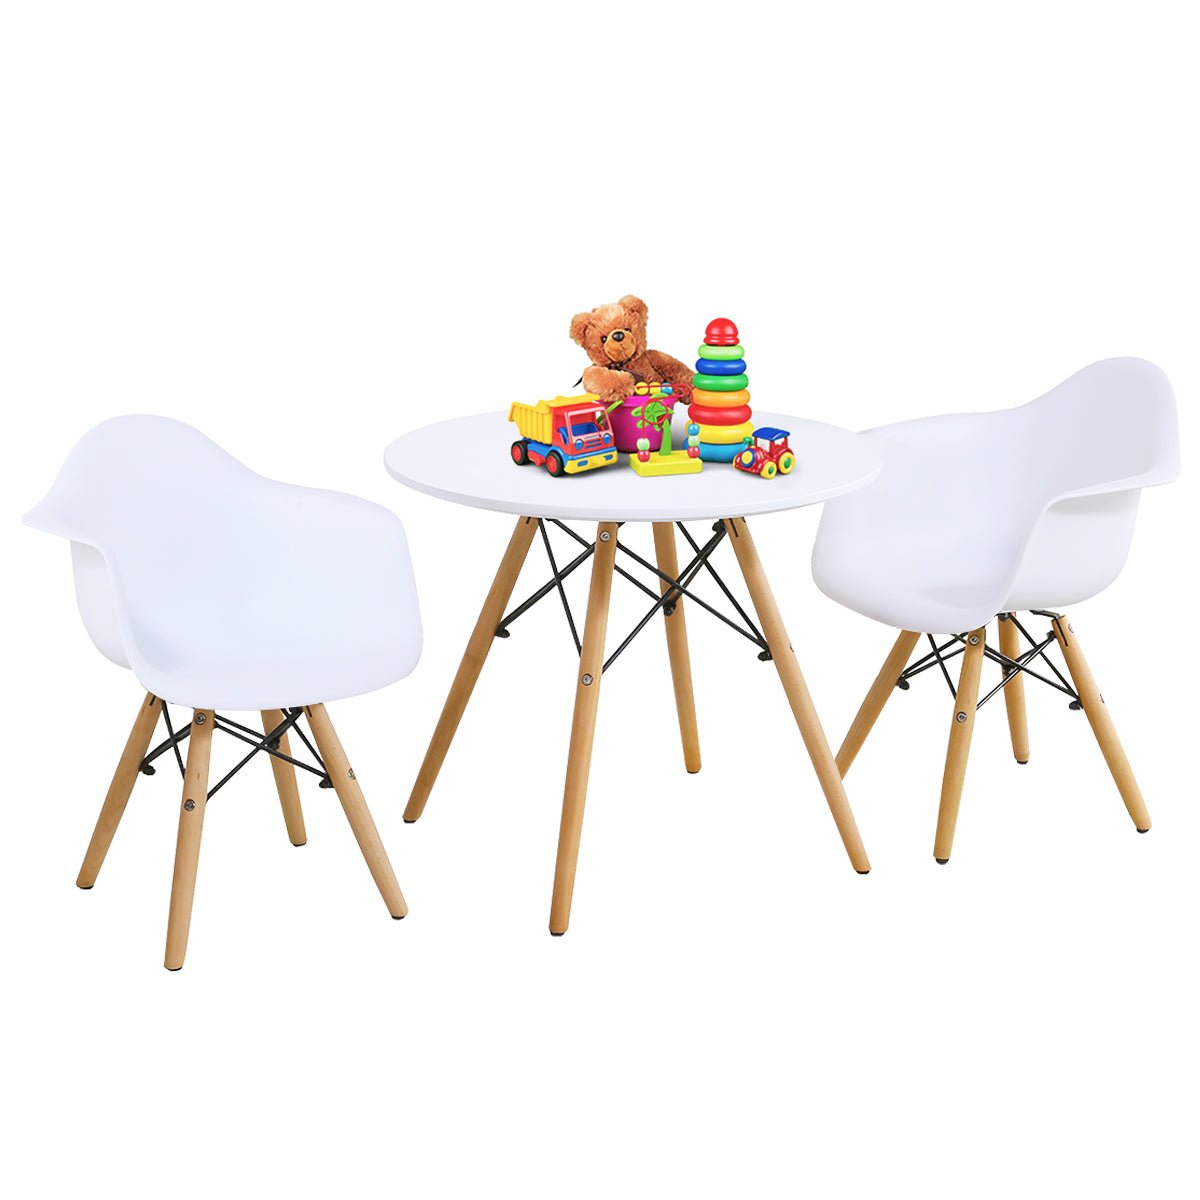 Kids Table and Chairs Set - Encourage Learning, Play, and Shared Meals